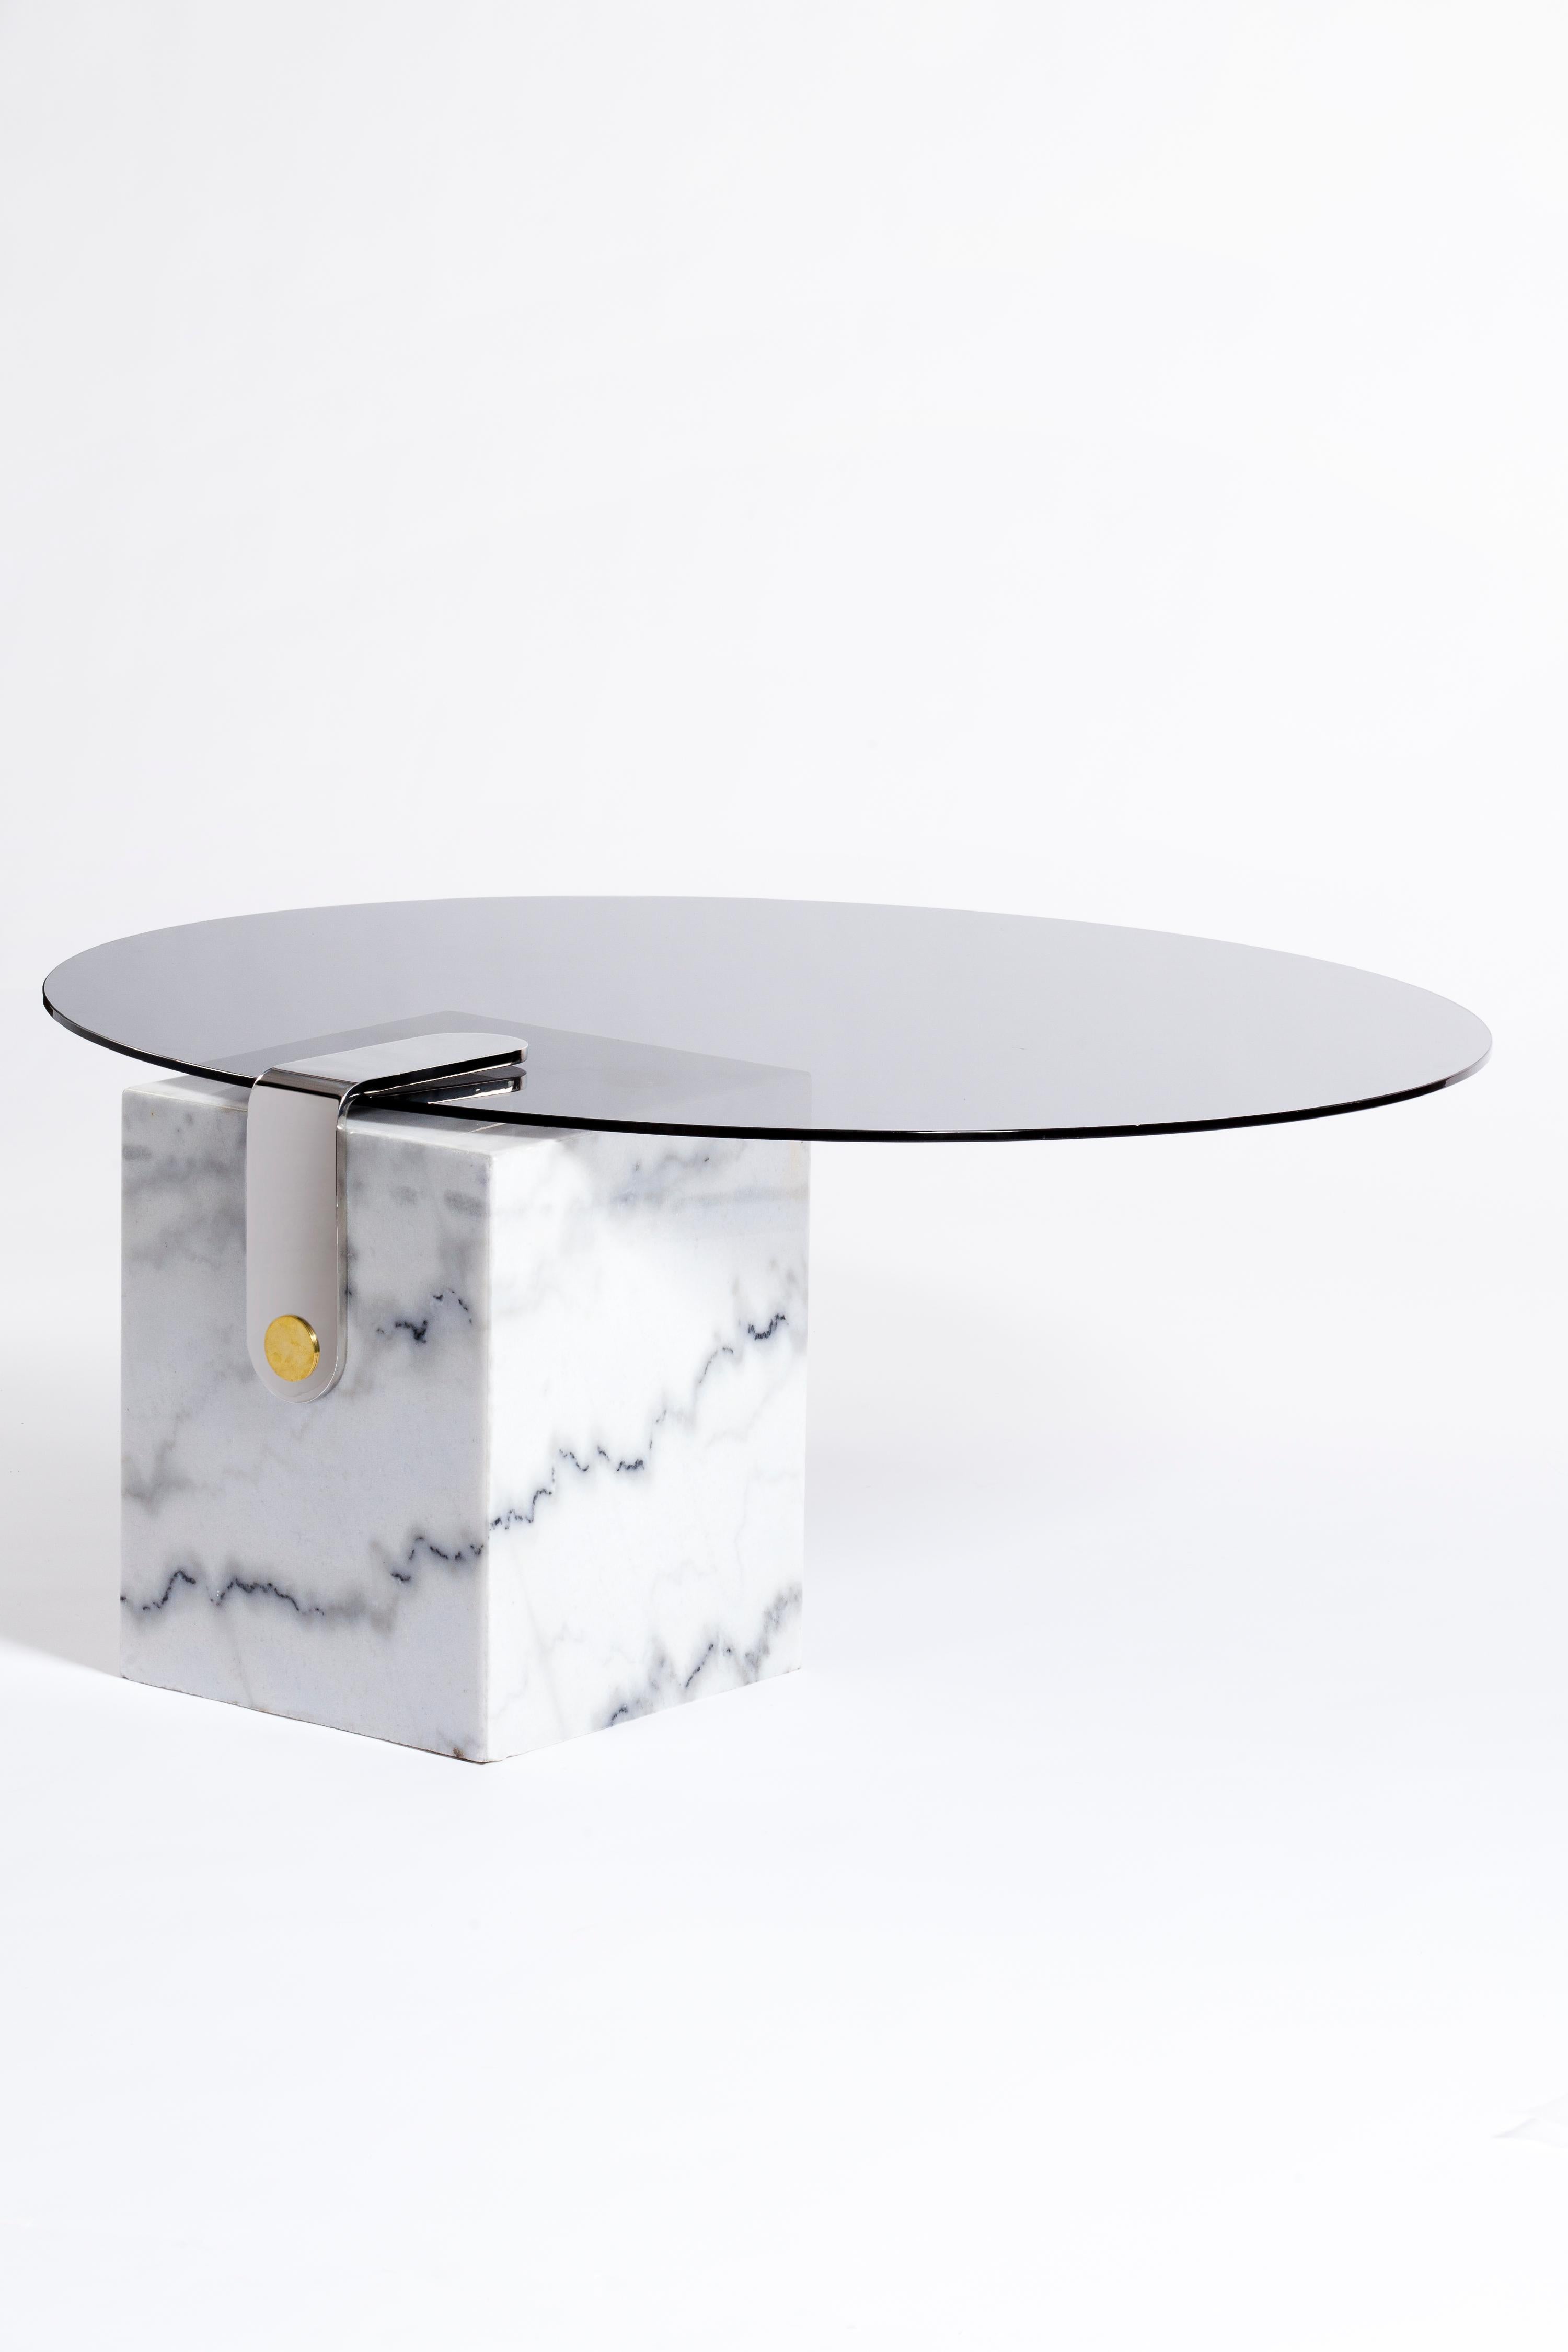 Marble Patch round coffee table by Egg Designs
Dimensions: 80 L X 81 D X 40 H cm
Materials: White Marble, Polished Stainless Steel, Brass Smokey Glass

Founded by South Africans and life partners, Greg and Roche Dry - Egg is a unique perspective